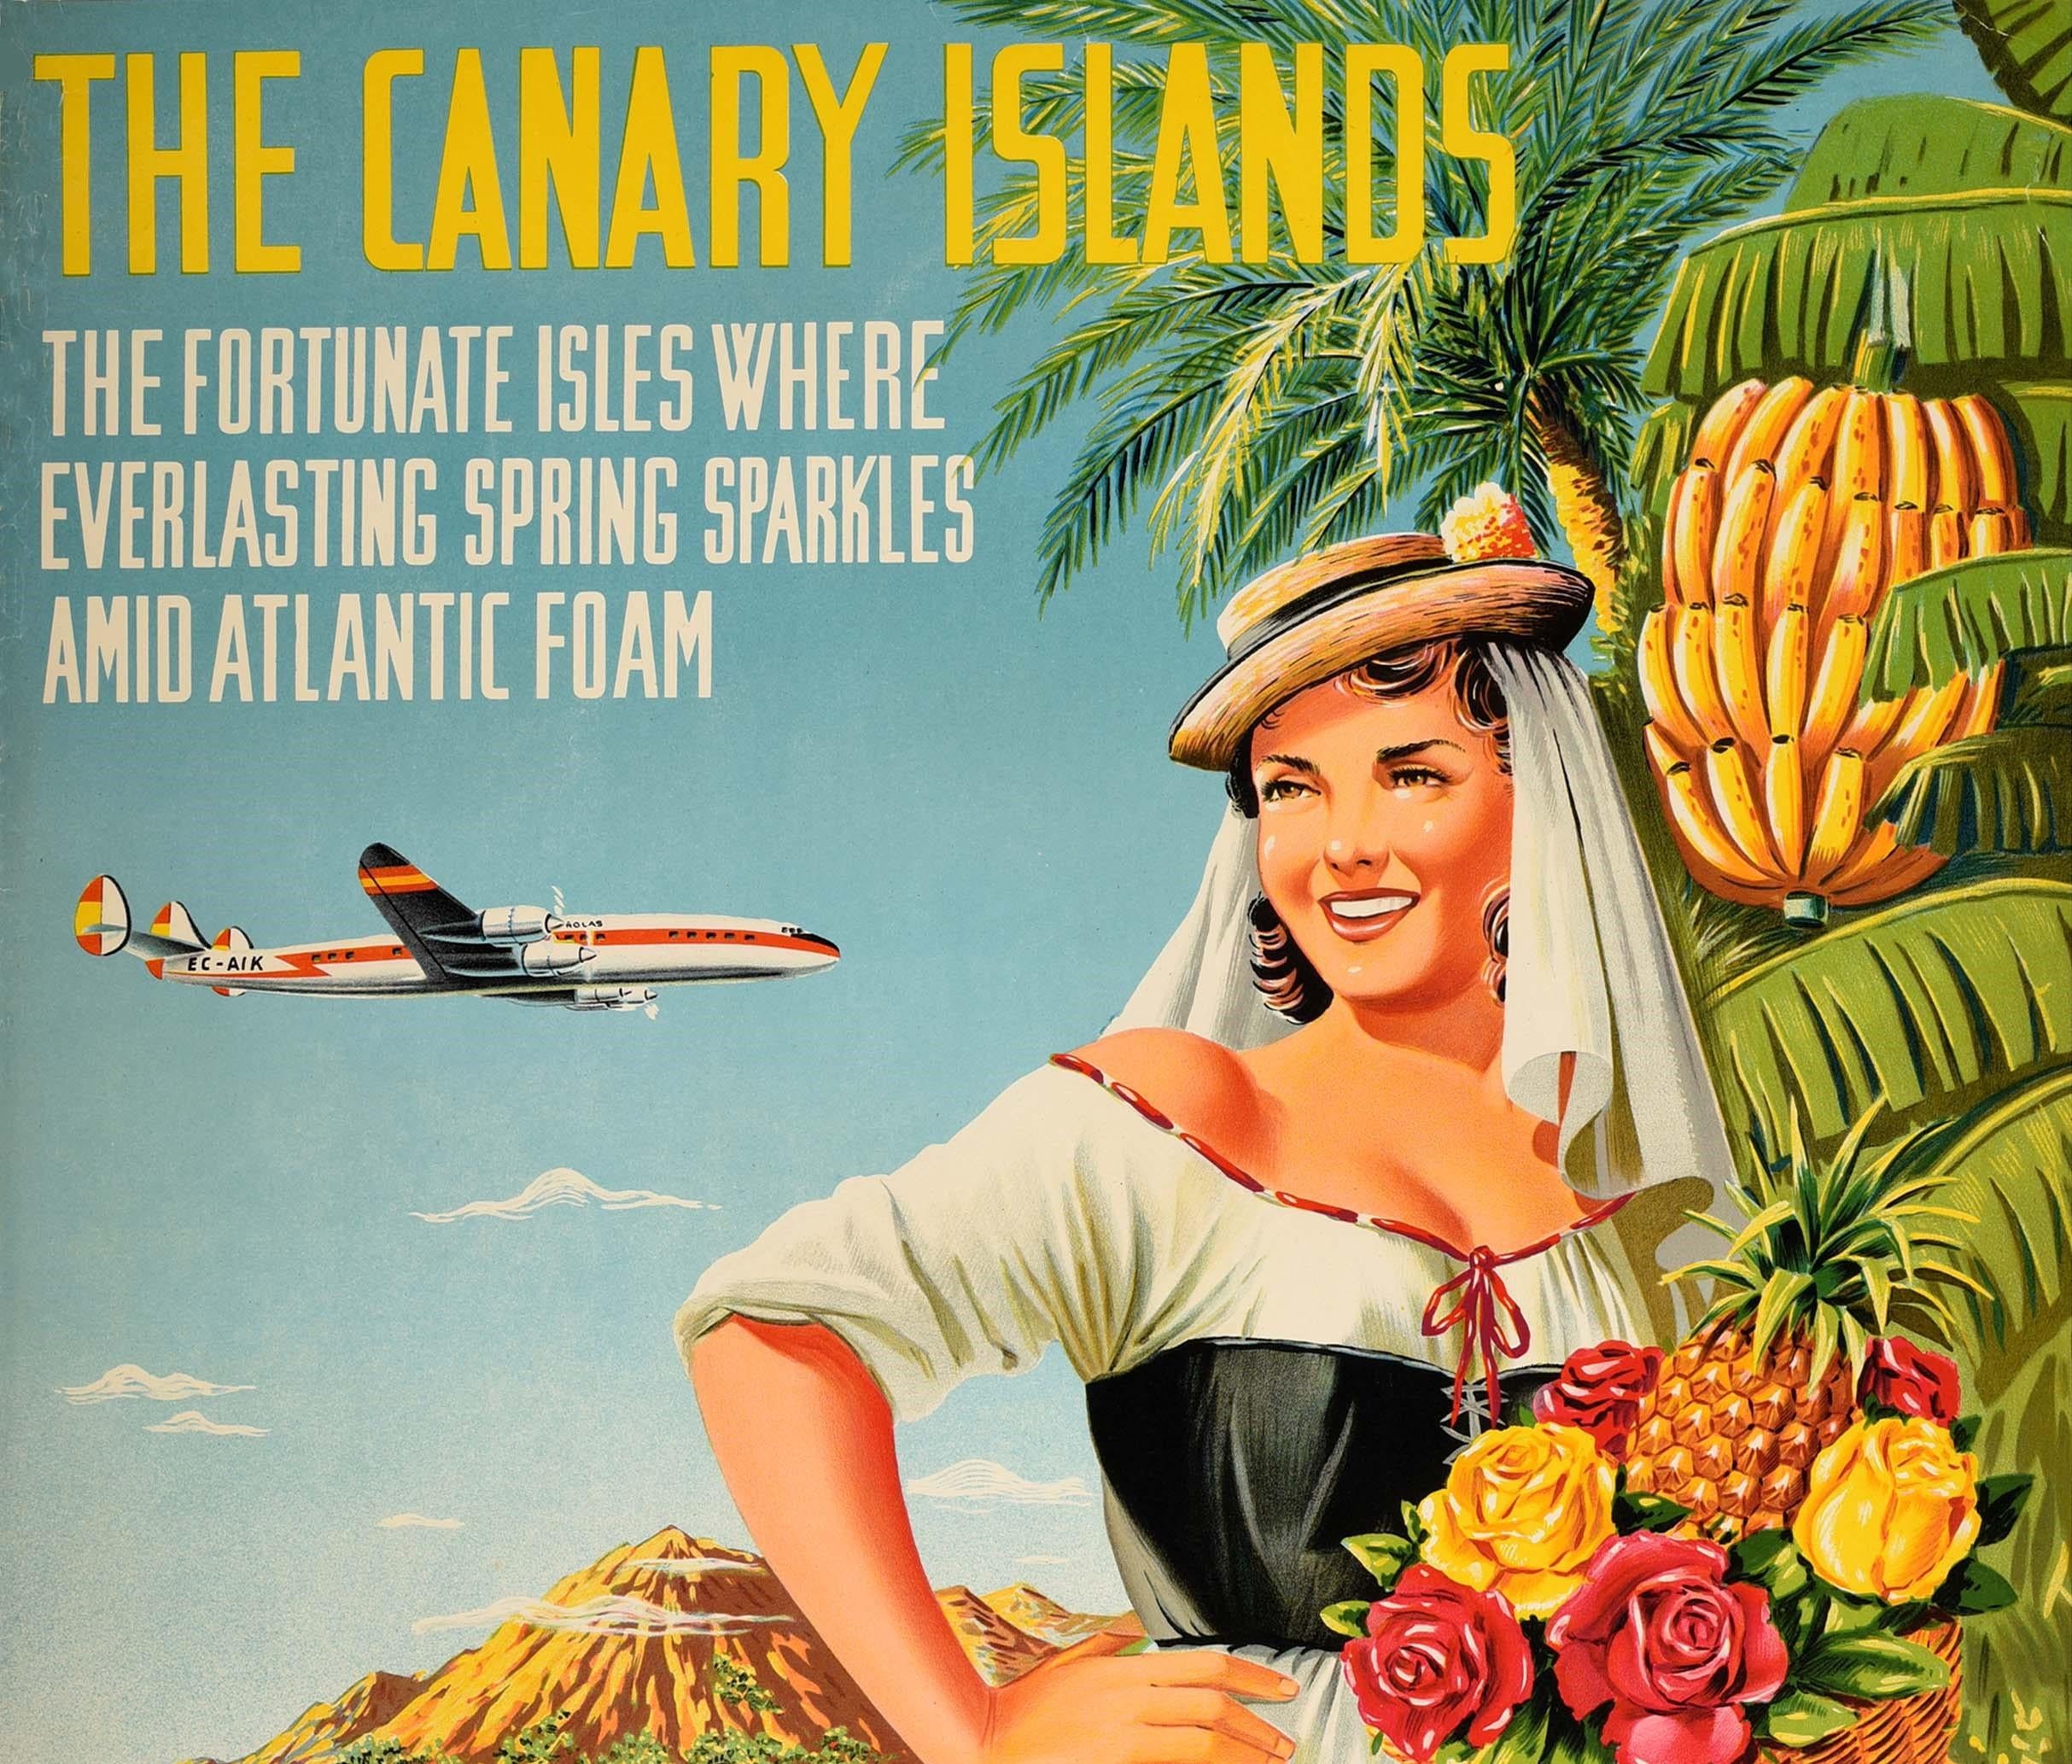 Original vintage travel poster - The Canary Islands The fortunate isles where everlasting spring sparkles amid Atlantic foam Fly Iberia Airlines of Spain - featuring a smiling lady wearing a traditional style dress with a veiled hat and apron over